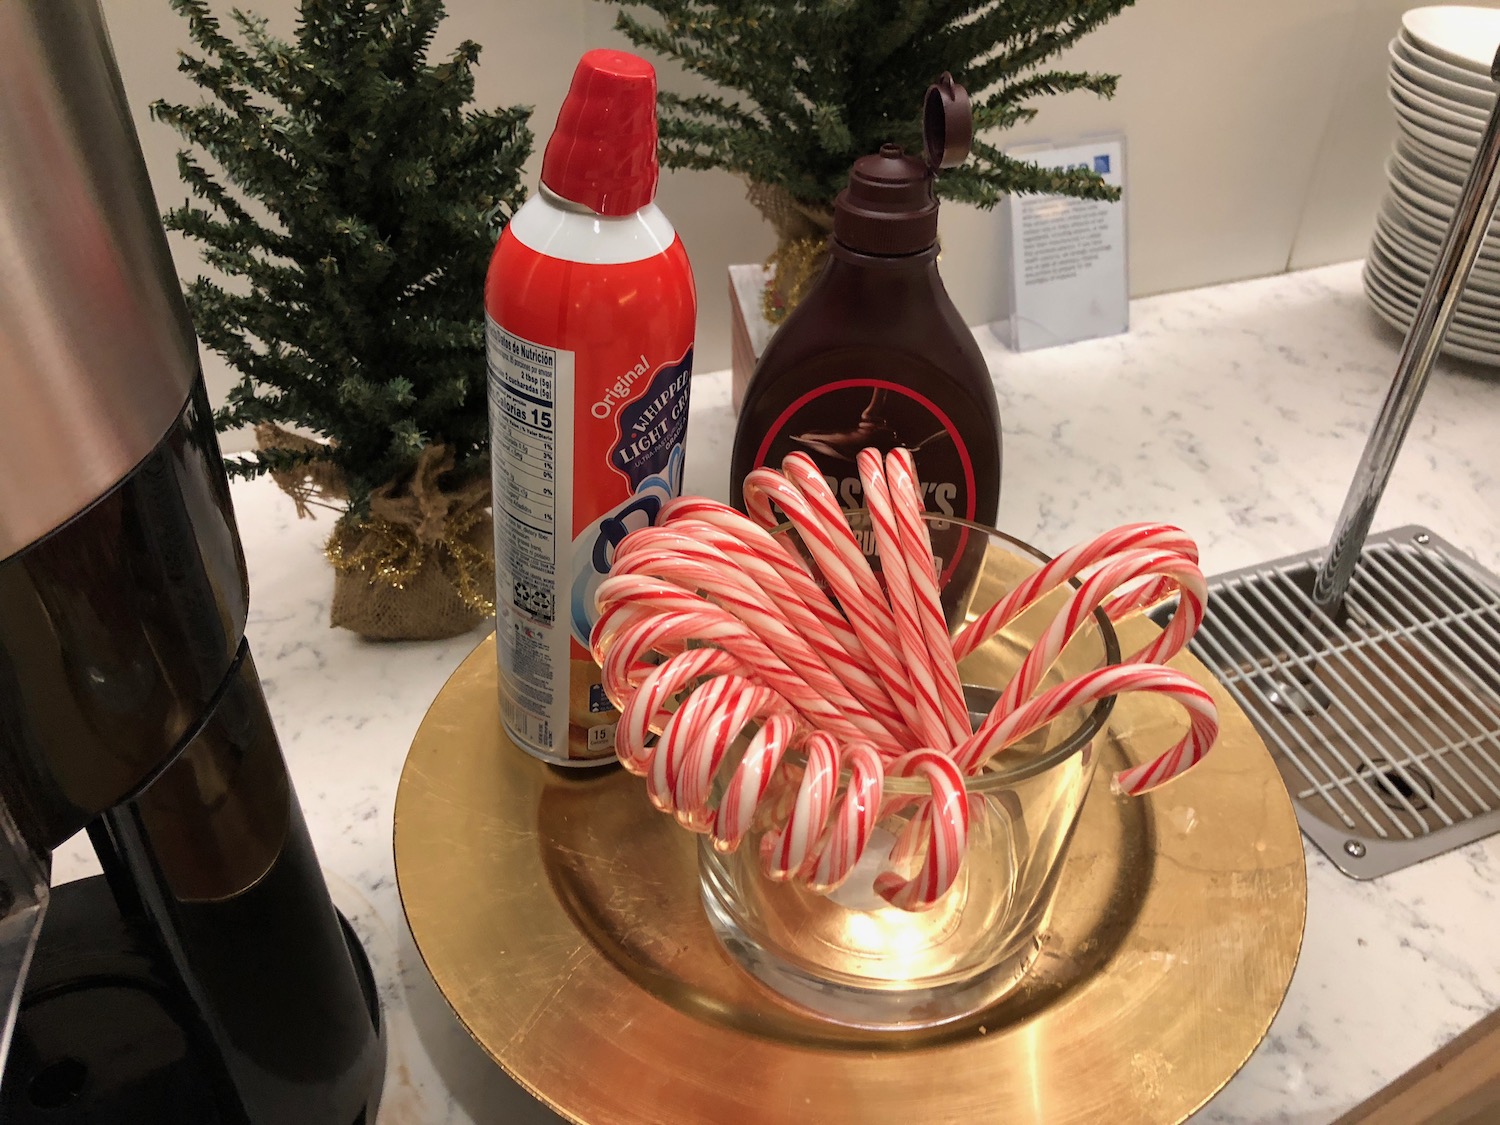 candy canes in a glass cup on a gold plate with a bottle of cleaner